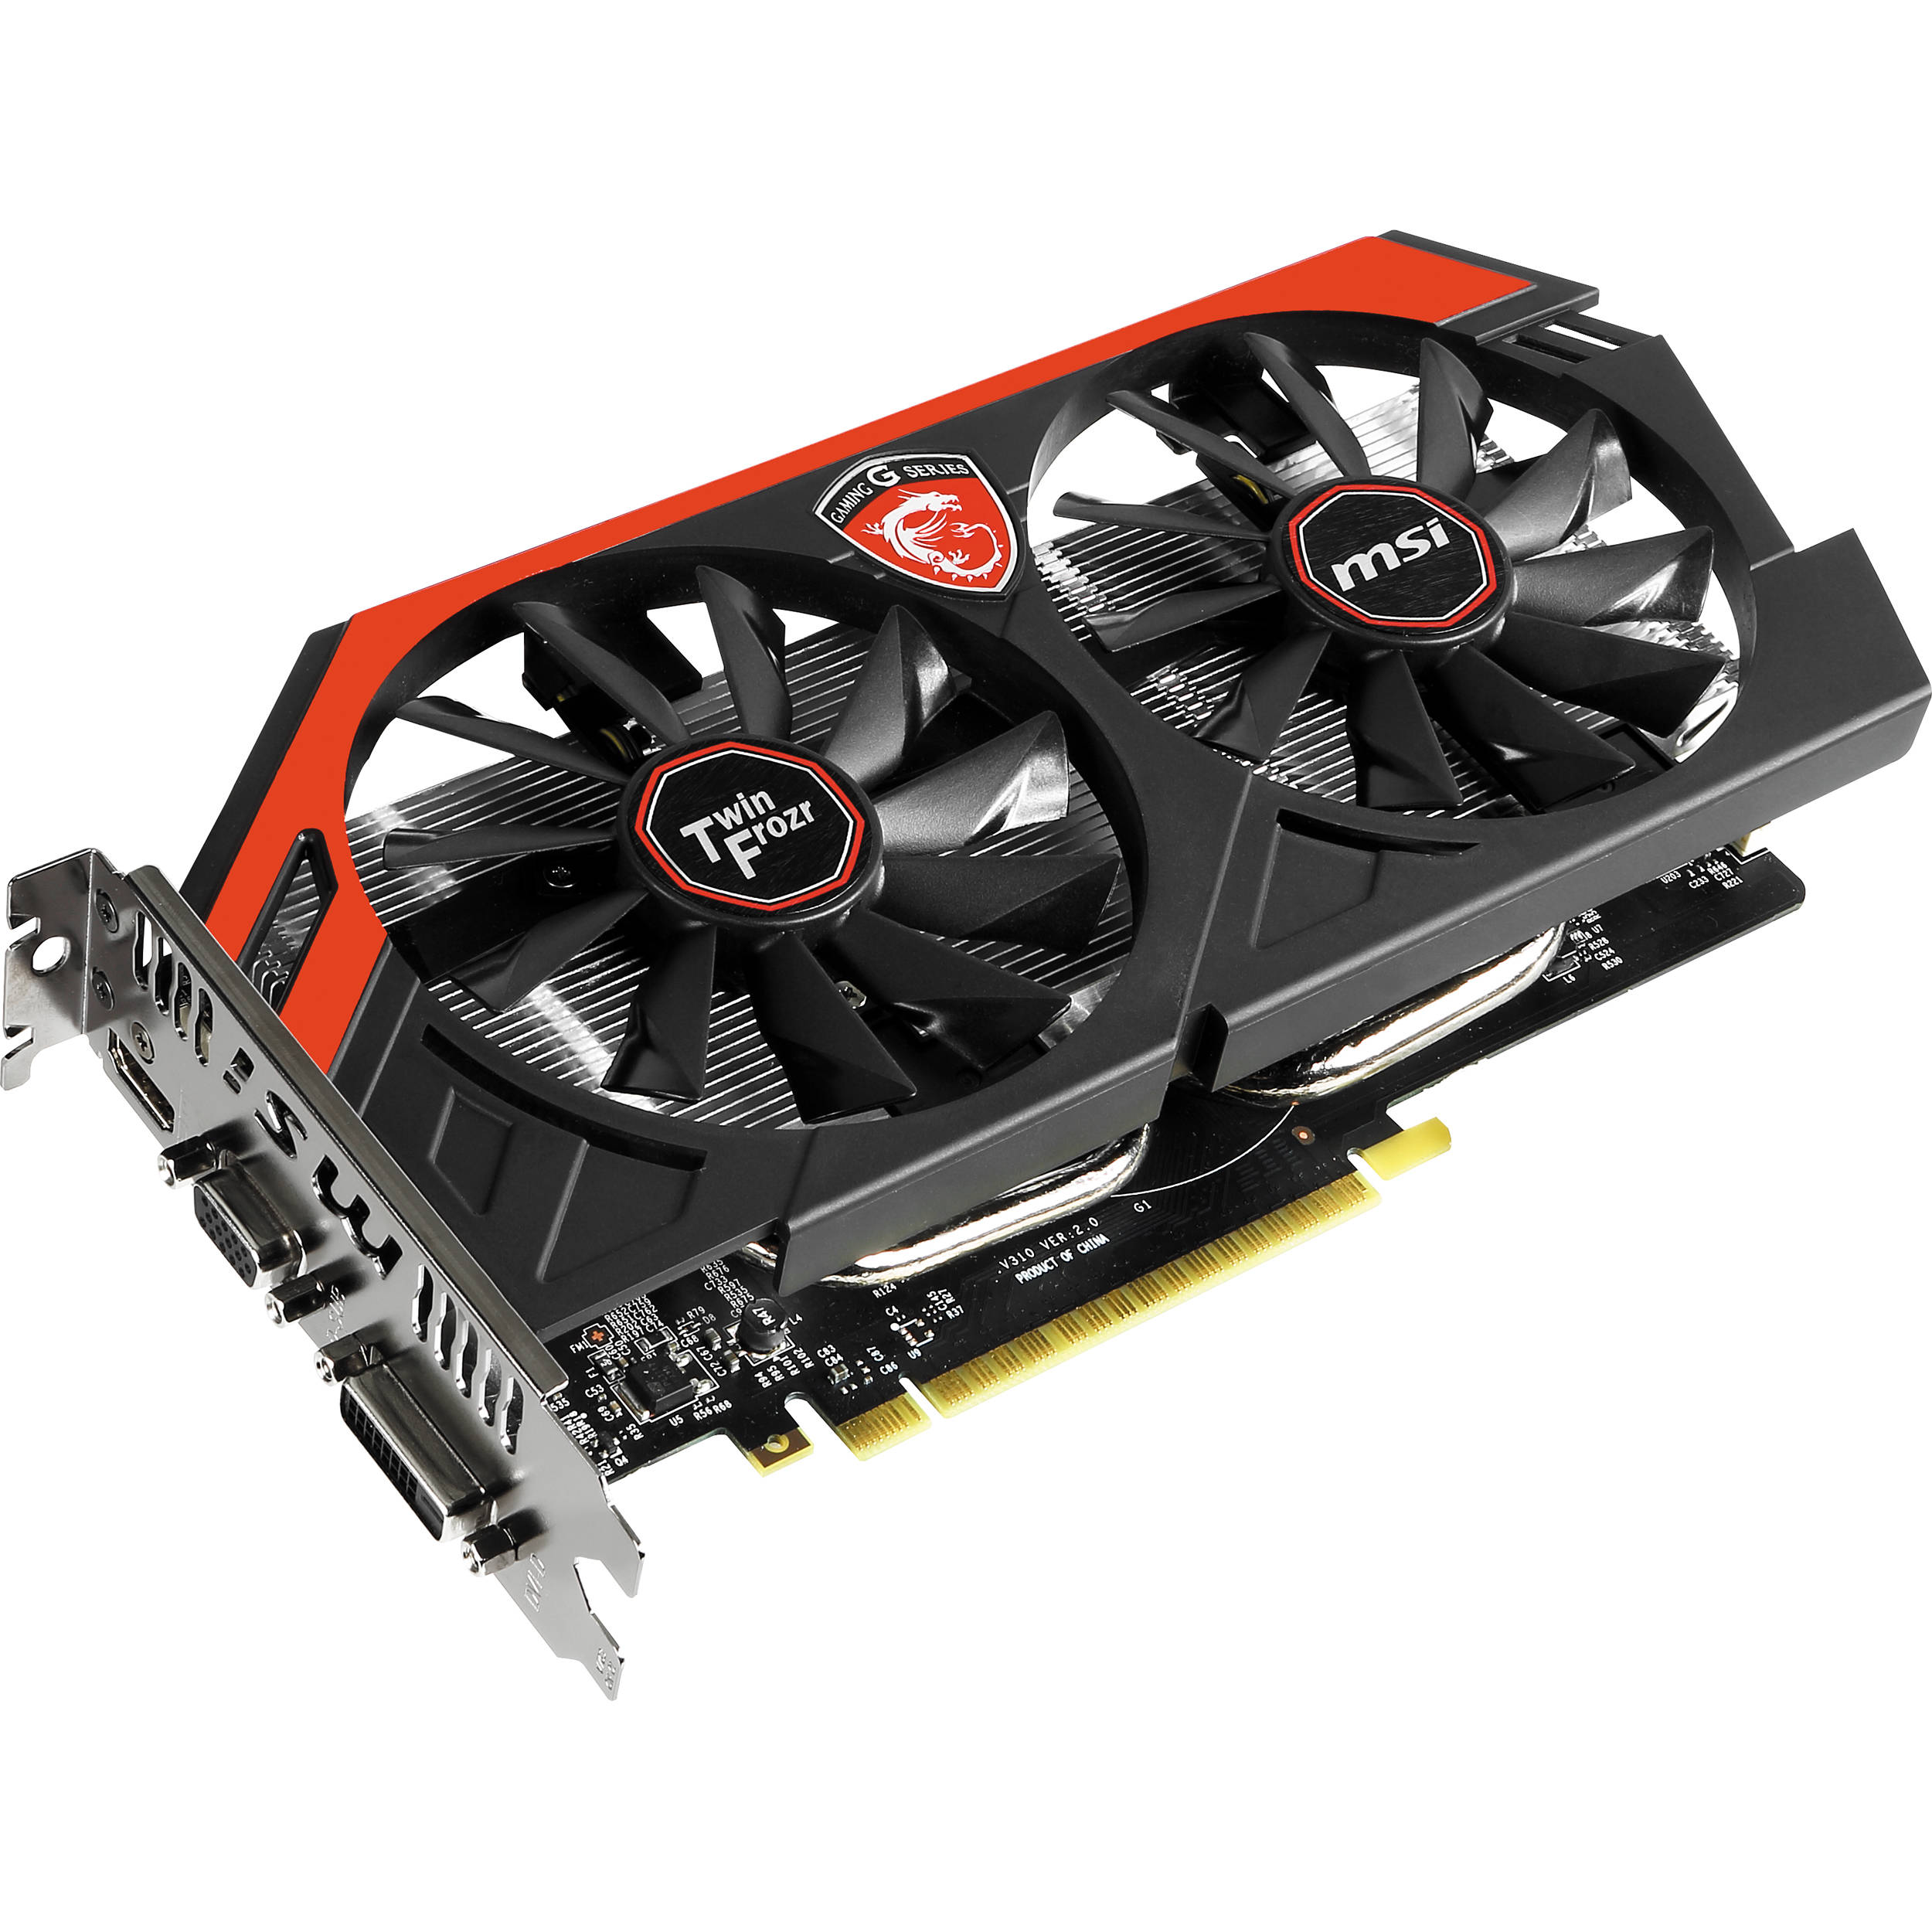 Gtx 750 Ti 4gb Driver Outlet Online Up To 55 Off Www Rectoraldeanllo Com